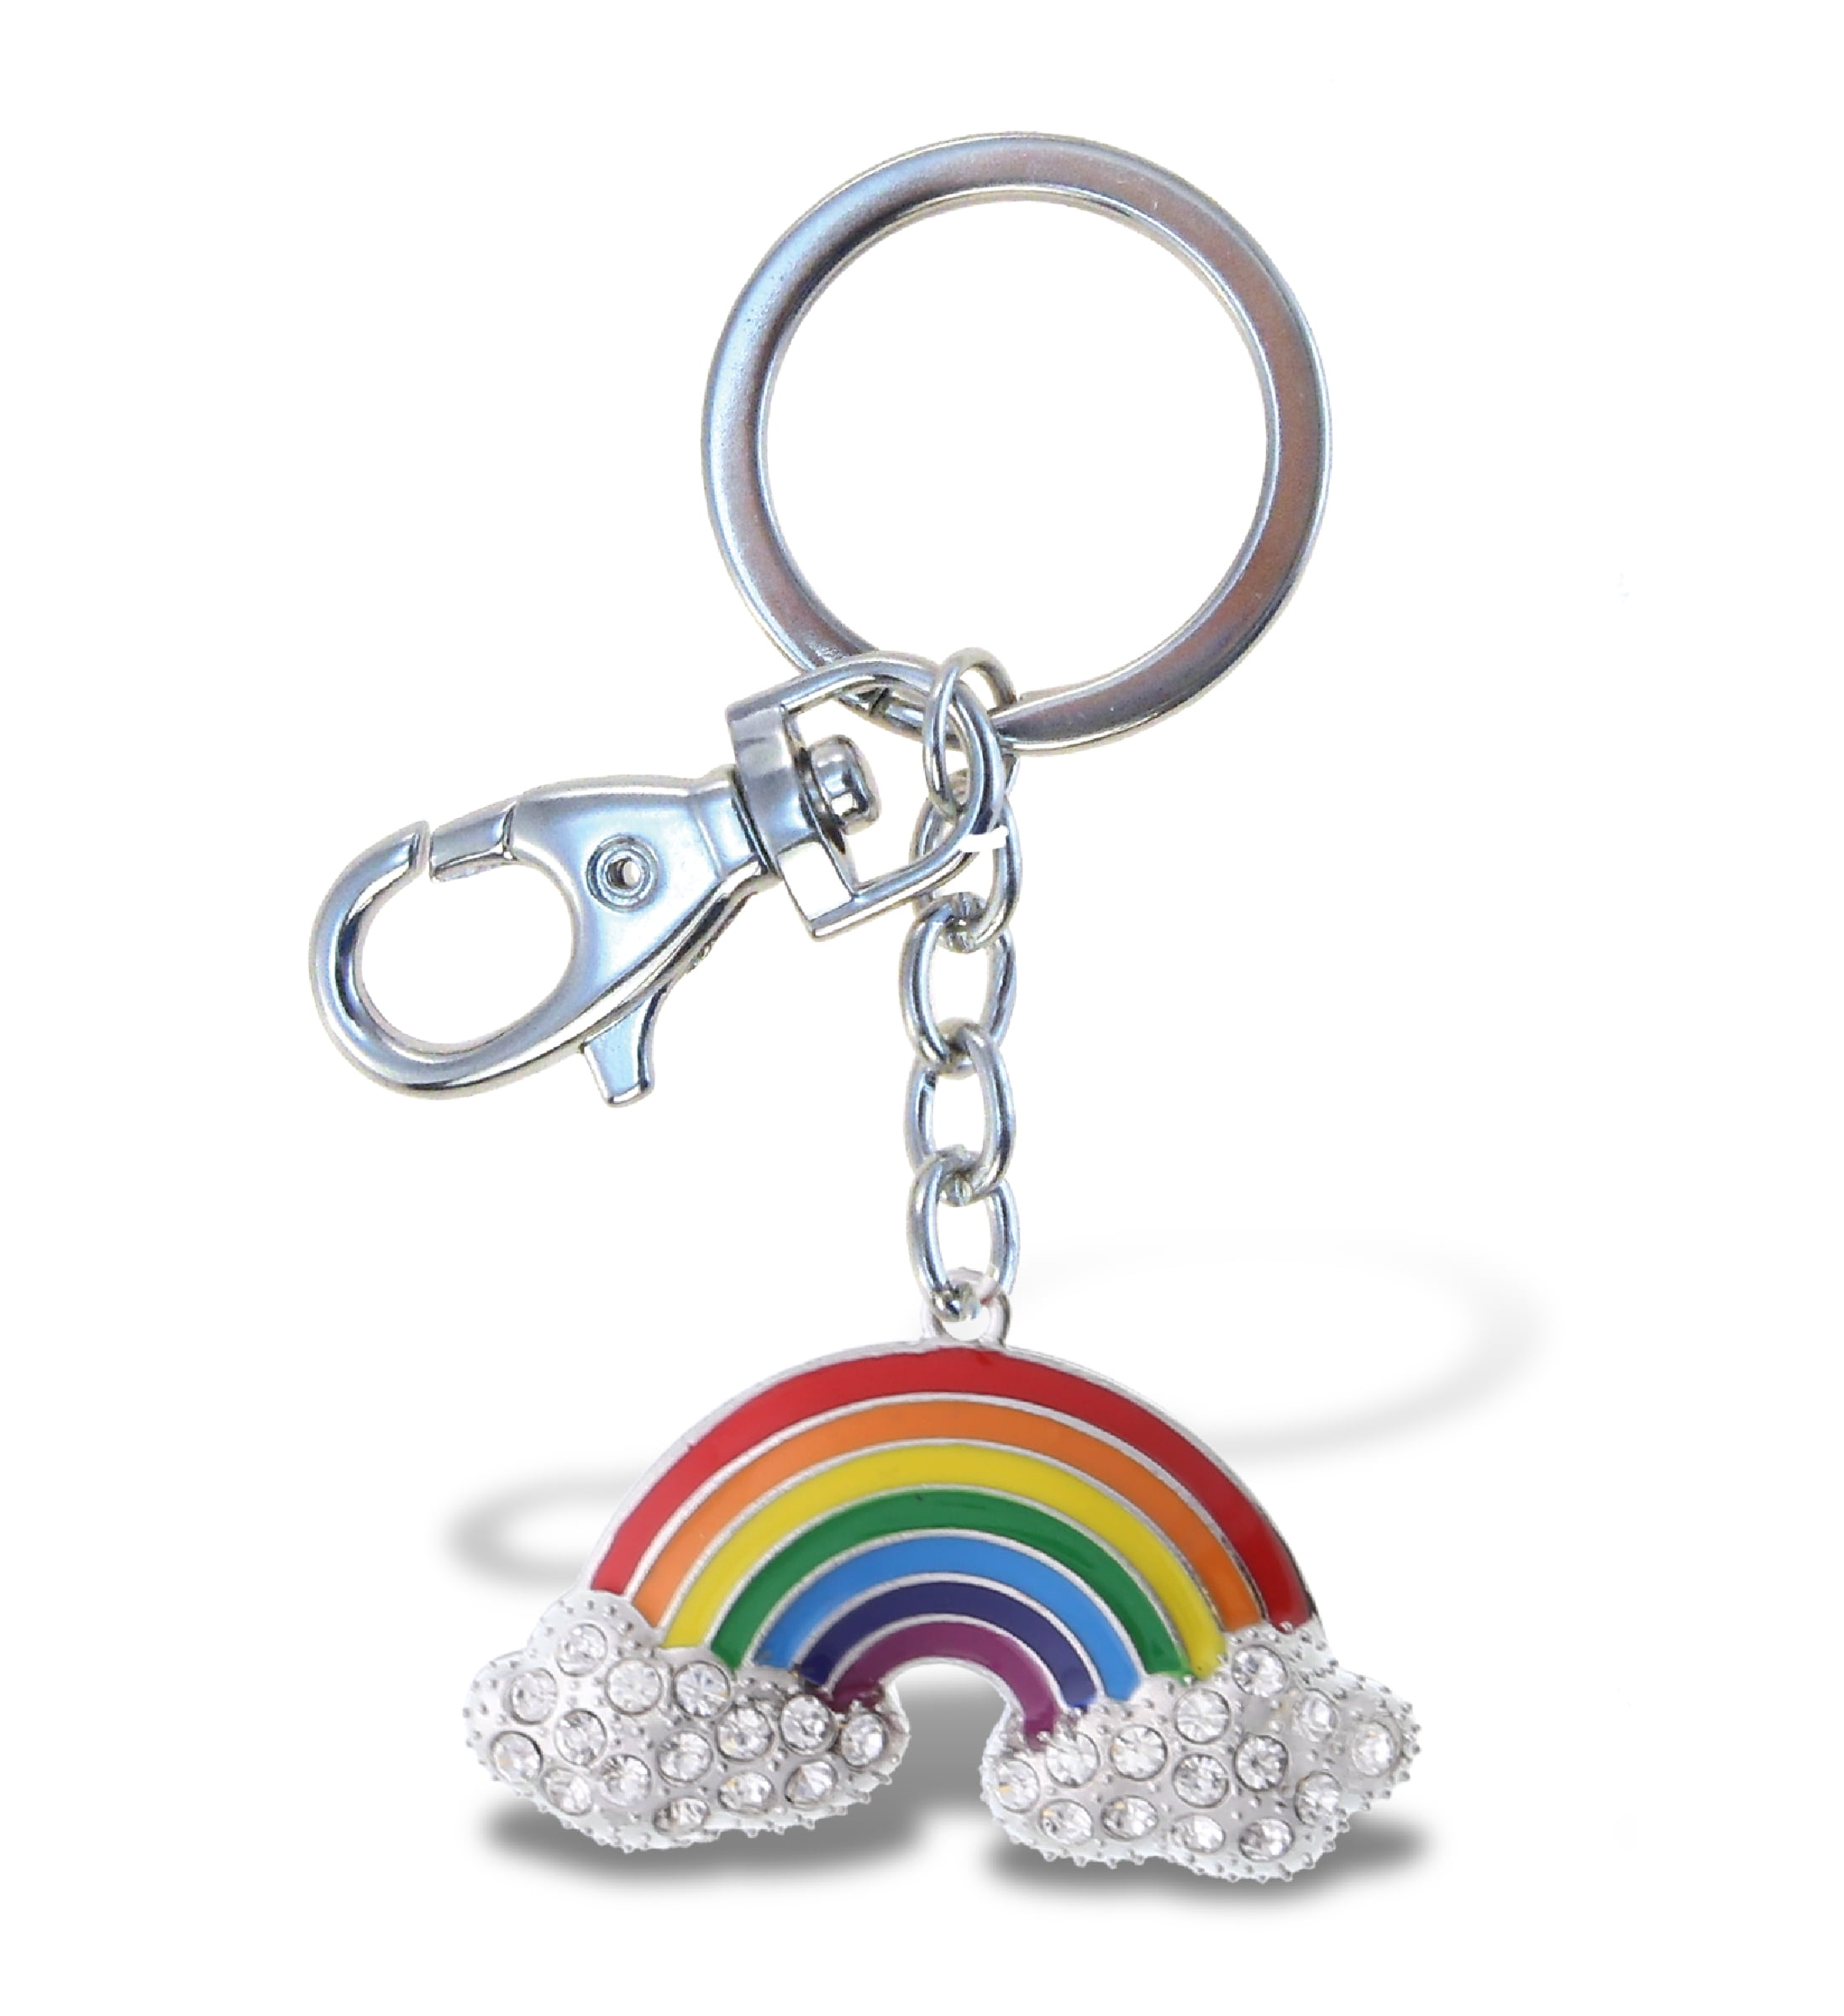 Chrome Plated Letter N Keychain Ring With Swarovski Crystals